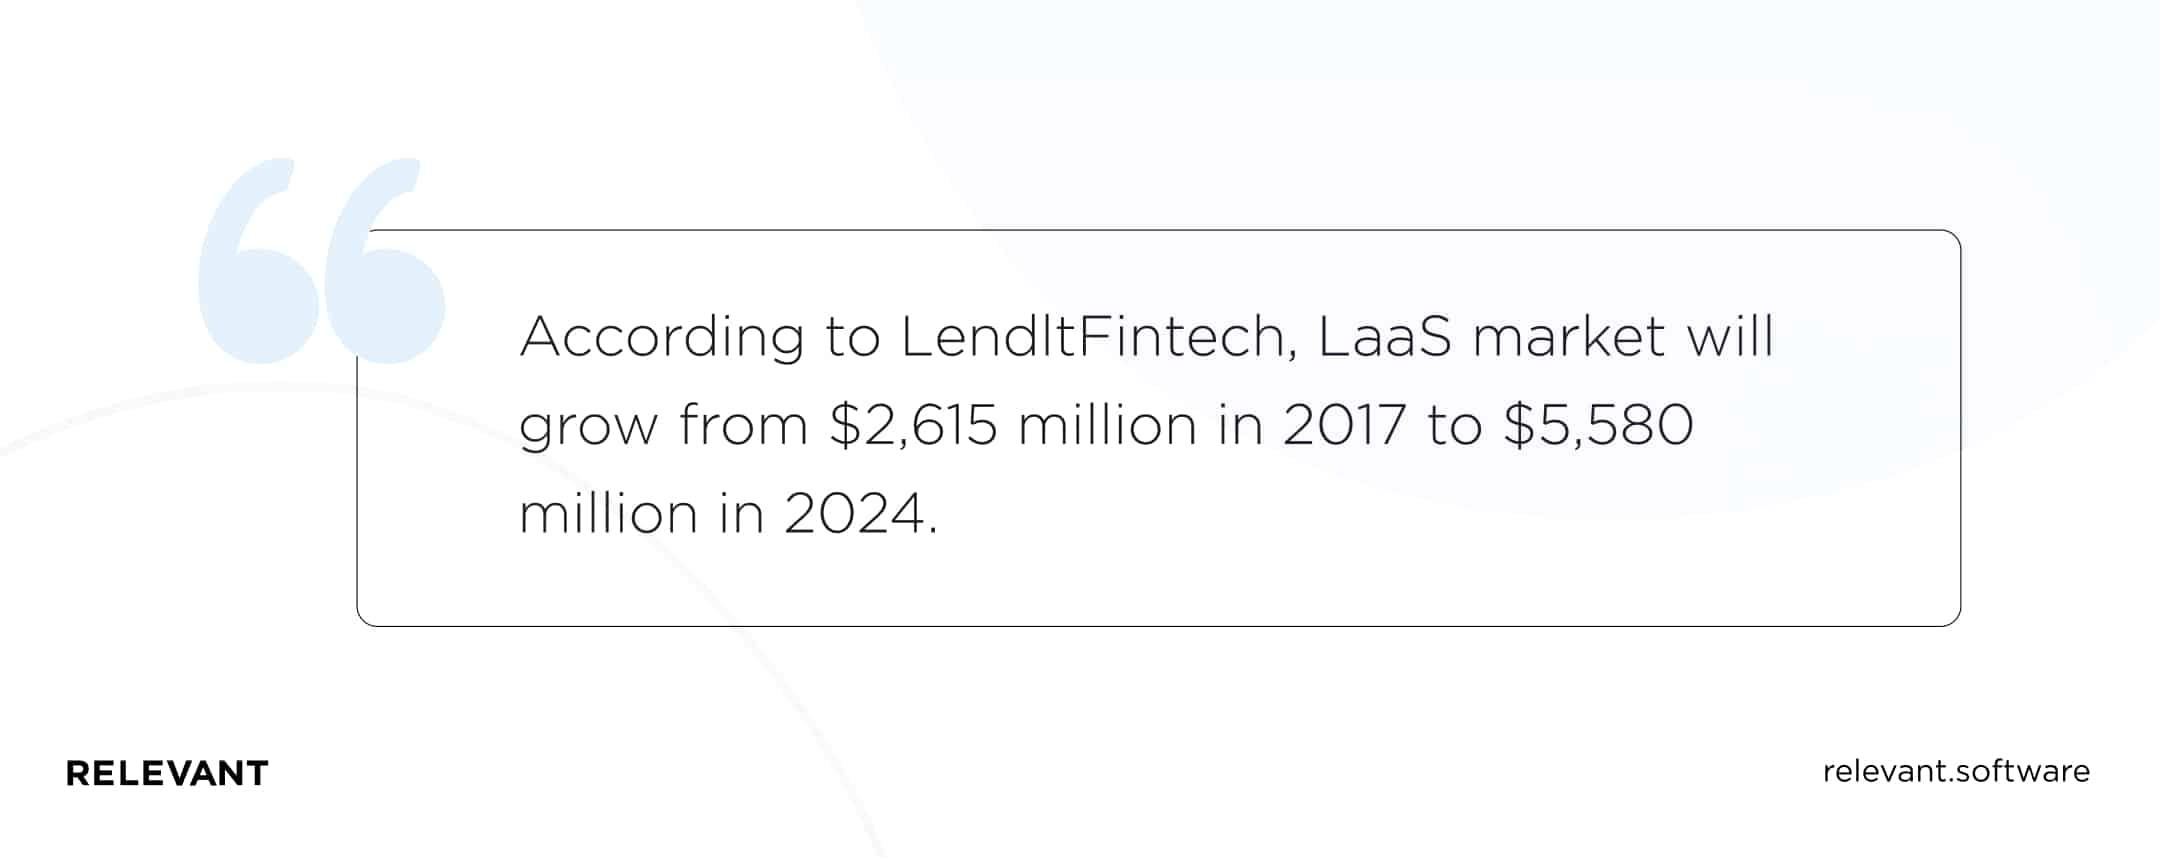 LaaS market, which is one of the newest fields in alternative financing, is projected to grow from 